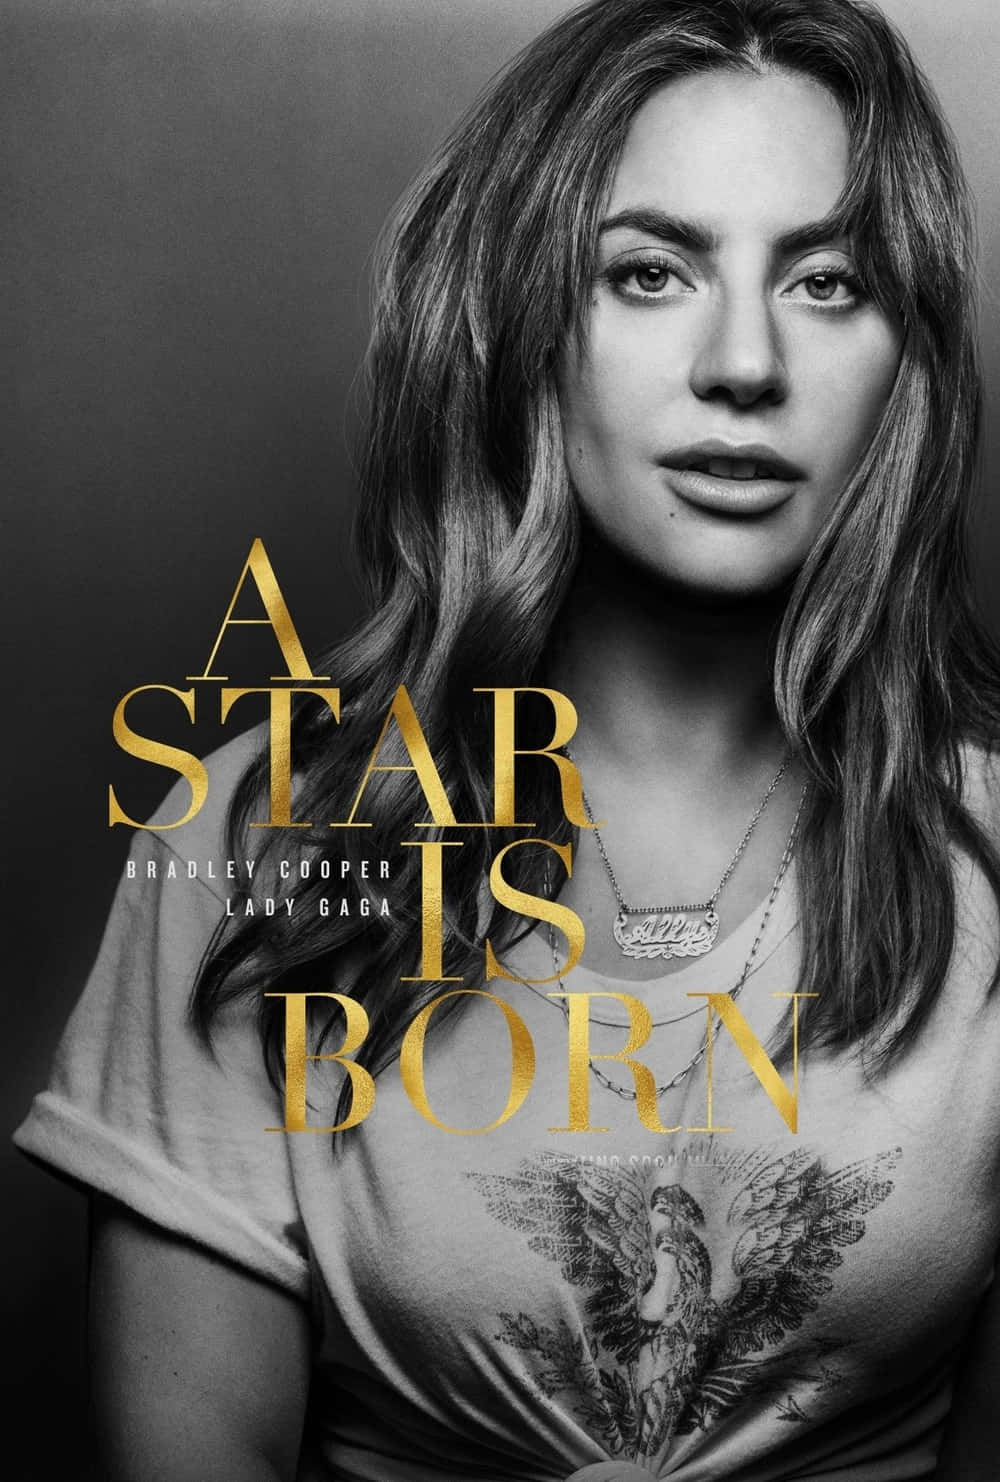 Caption: A Star Is Born (2018) - Bradley Cooper And Lady Gaga's Stunning Performance Wallpaper